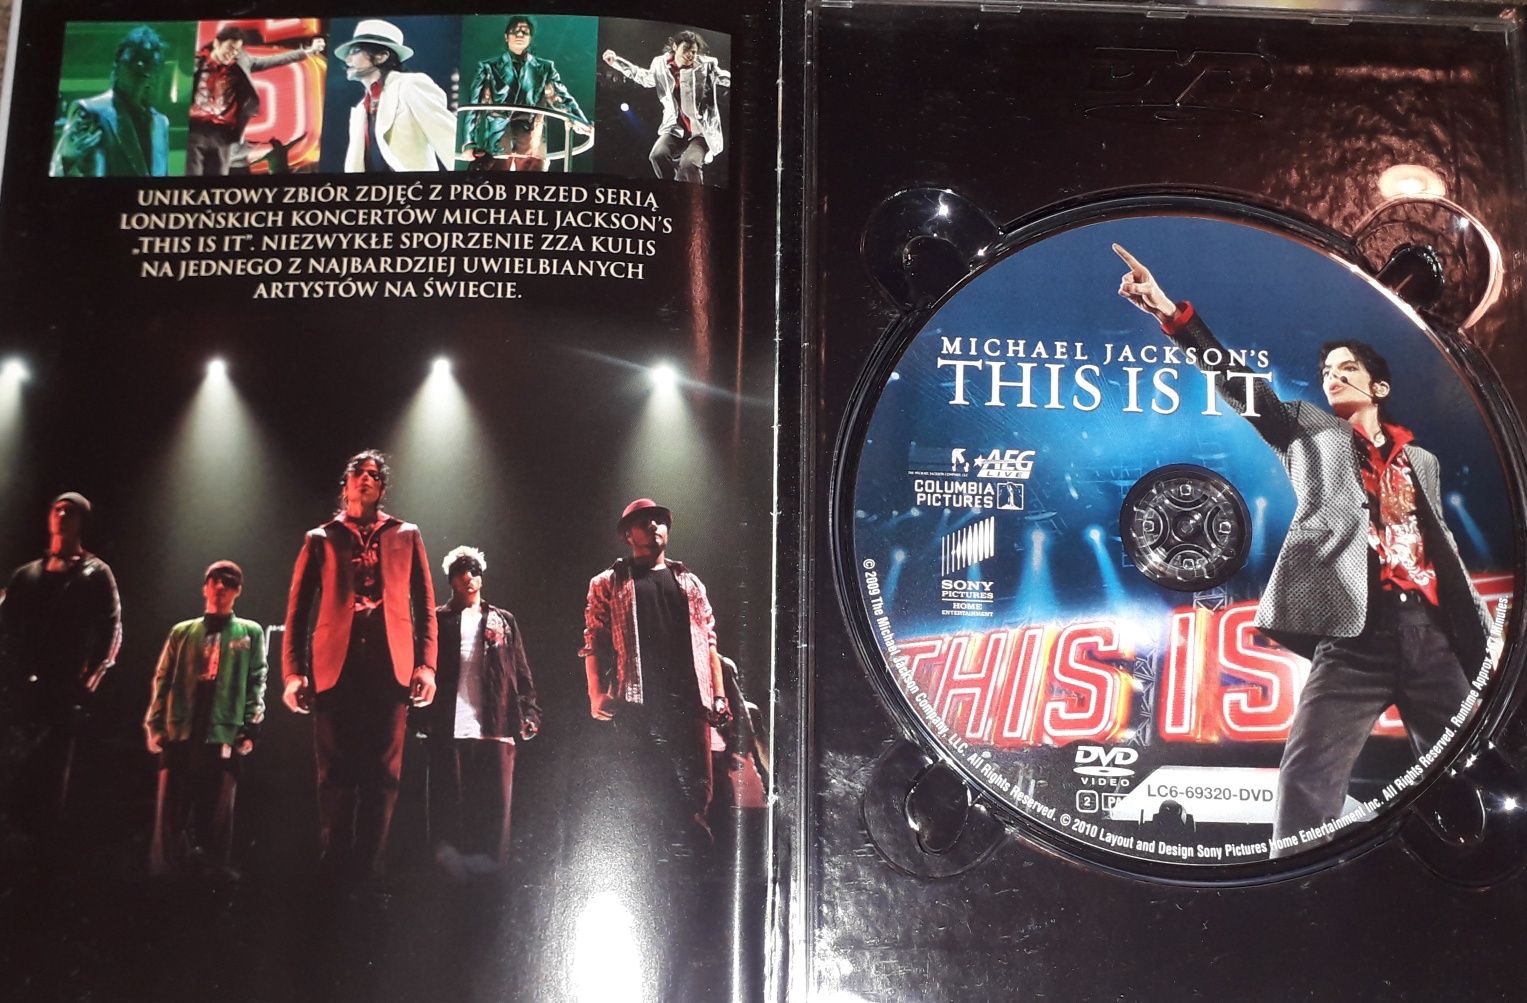 Michael Jackson's This is it dvd